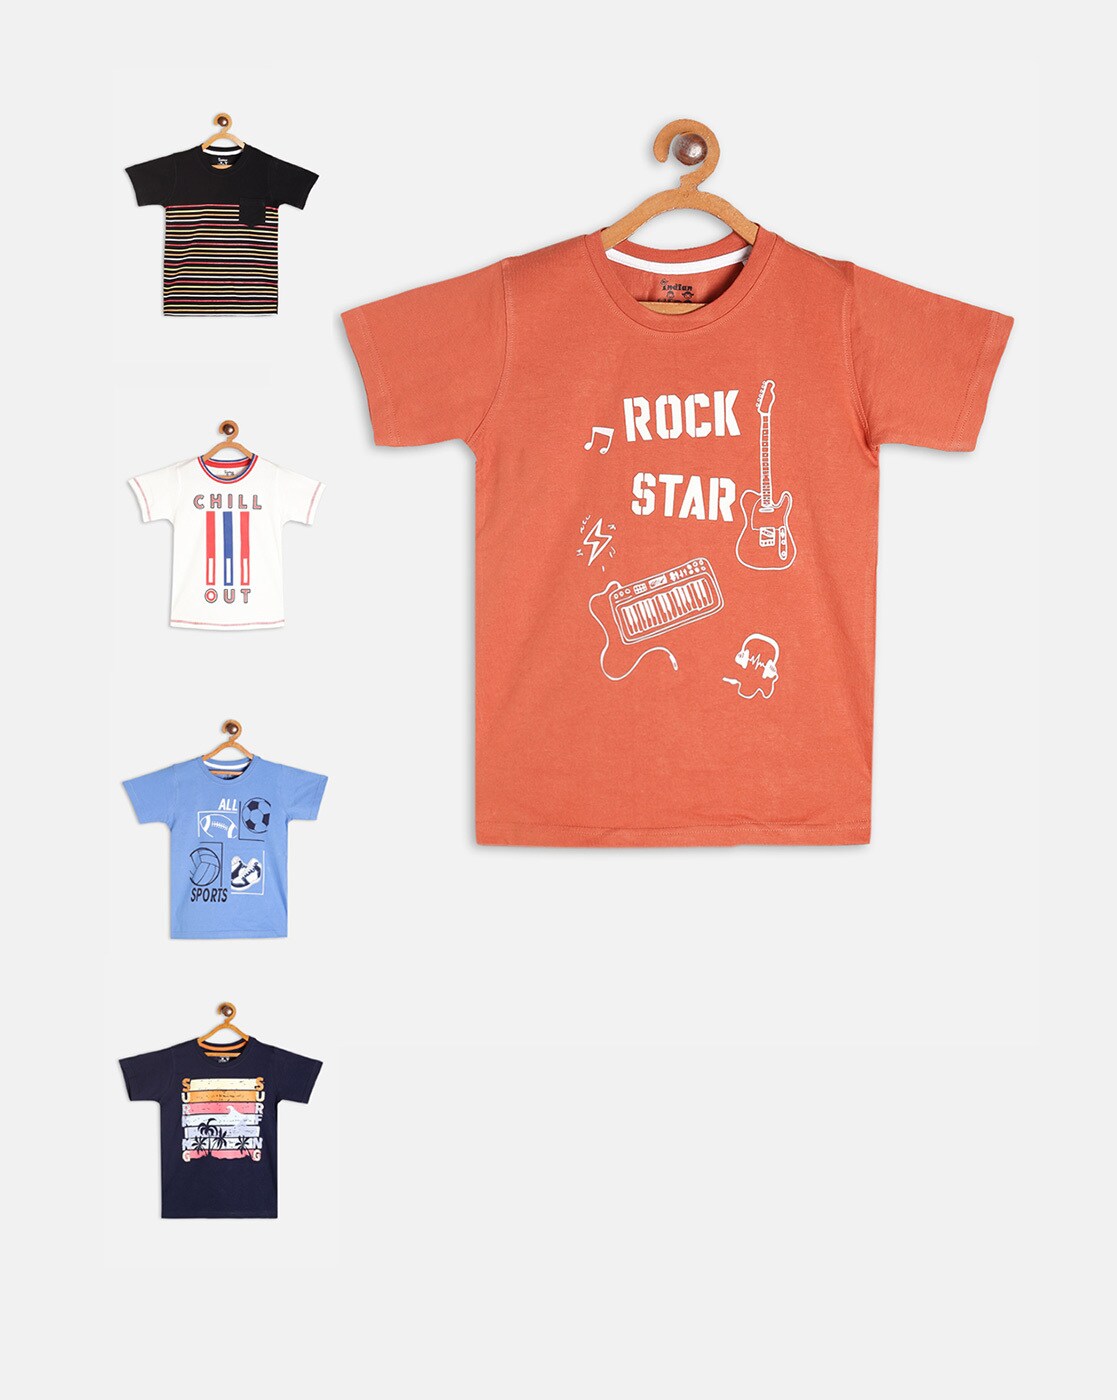 Buy All Star Shirt Online In India -  India